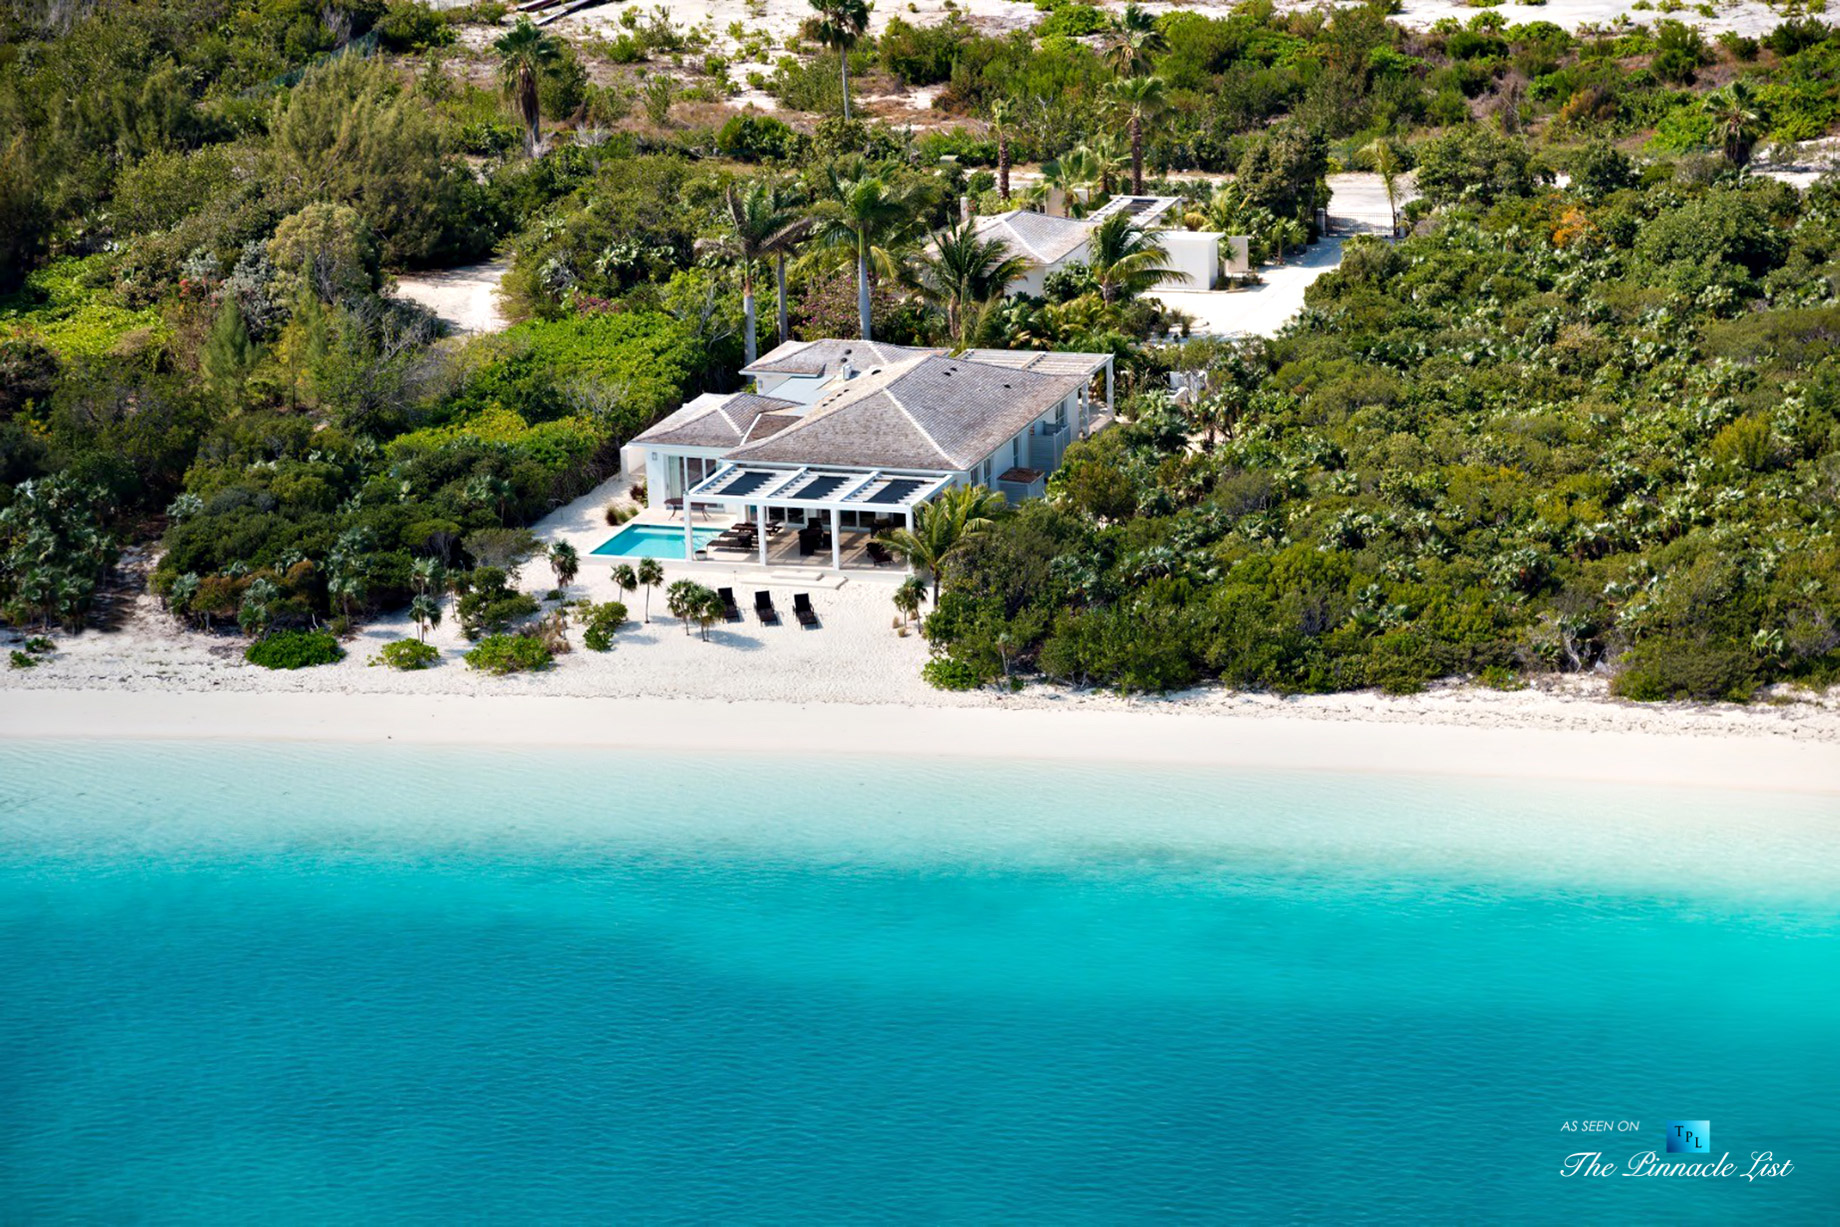 Villa Aquazure - Providenciales, Turks and Caicos Islands - Drone Aerial View - Luxury Real Estate - Beachfront Home